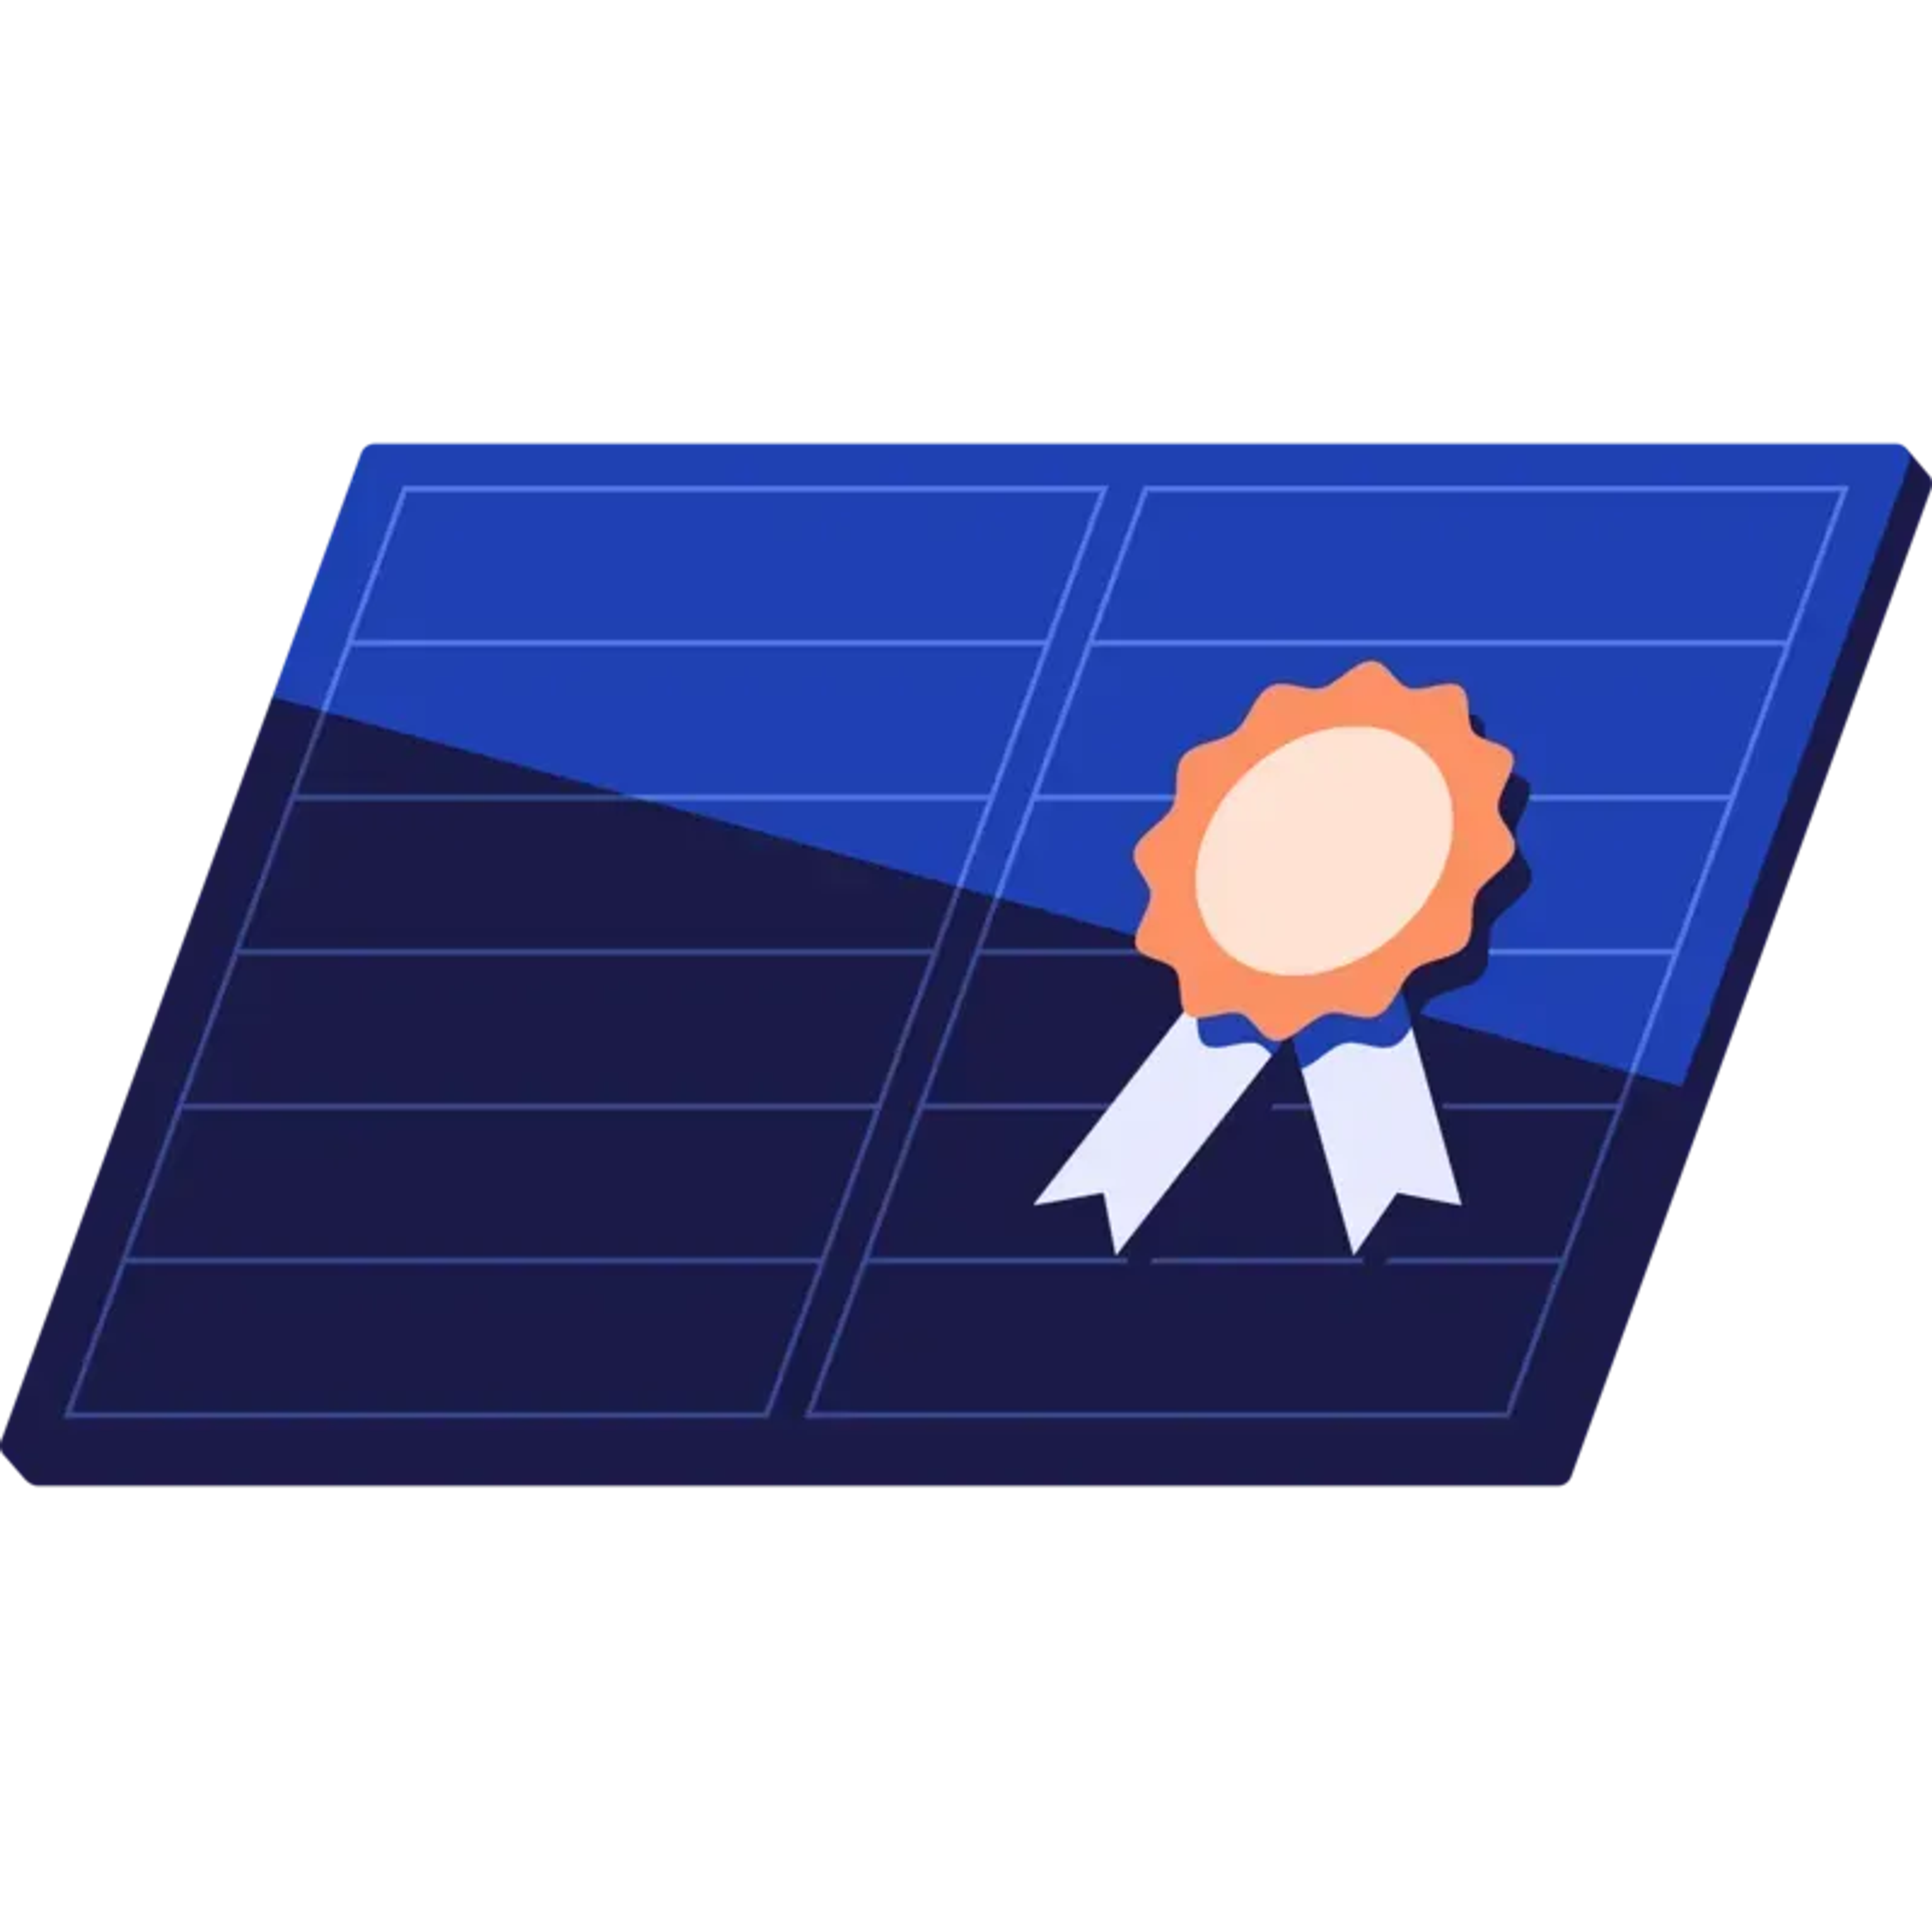 Solar panels with a medal symbol